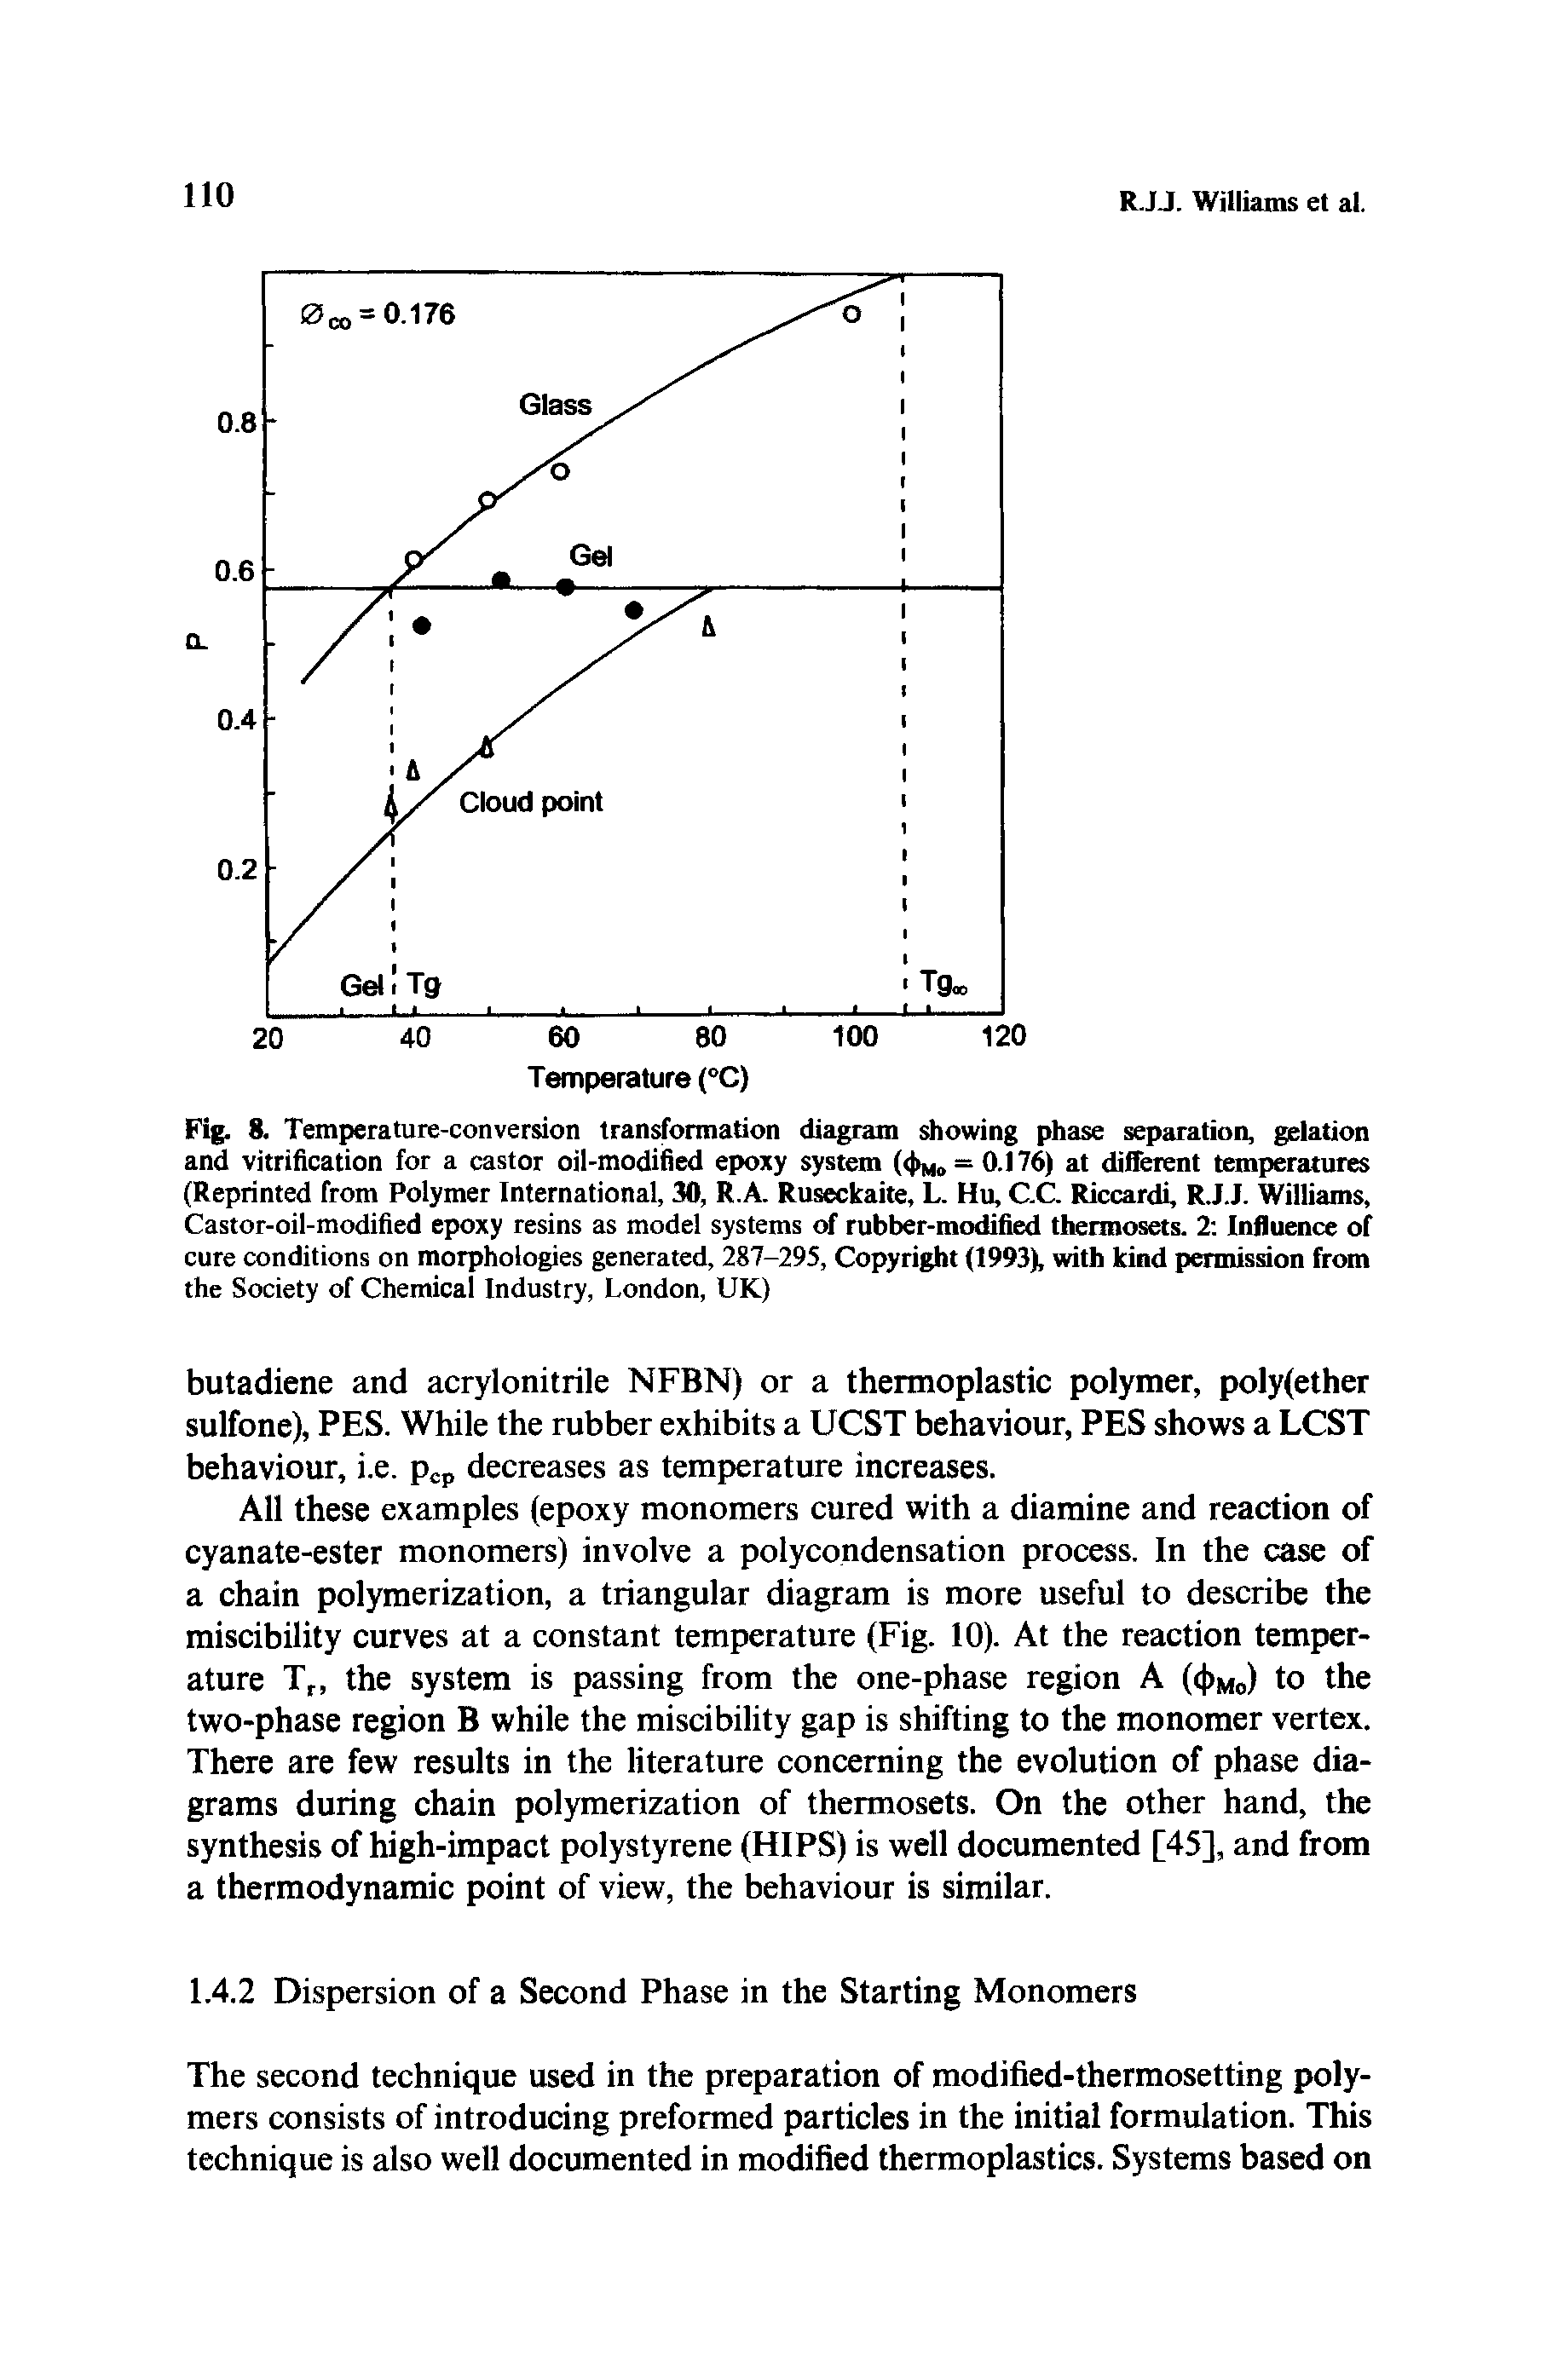 Fig. 8. Temperature-conversion transformation diagram lowing phase separation, gelation and vitrification for a castor oil-modiiSed epoxy system (< > , = 0.176) at different temperatures (Reprinted from Polymer International, 30, R.A. Ruseckaite, L. Hu, C.C. Riccardi, RJ.J. Williams, Castor-oil-modified epoxy resins as model systems of rubber-modified thermosets. 2 Influence of cure conditions on morphologies generated, 287-295, Copyright (1993), with kind permission from the Society of Chemical Industry, London, UK)...